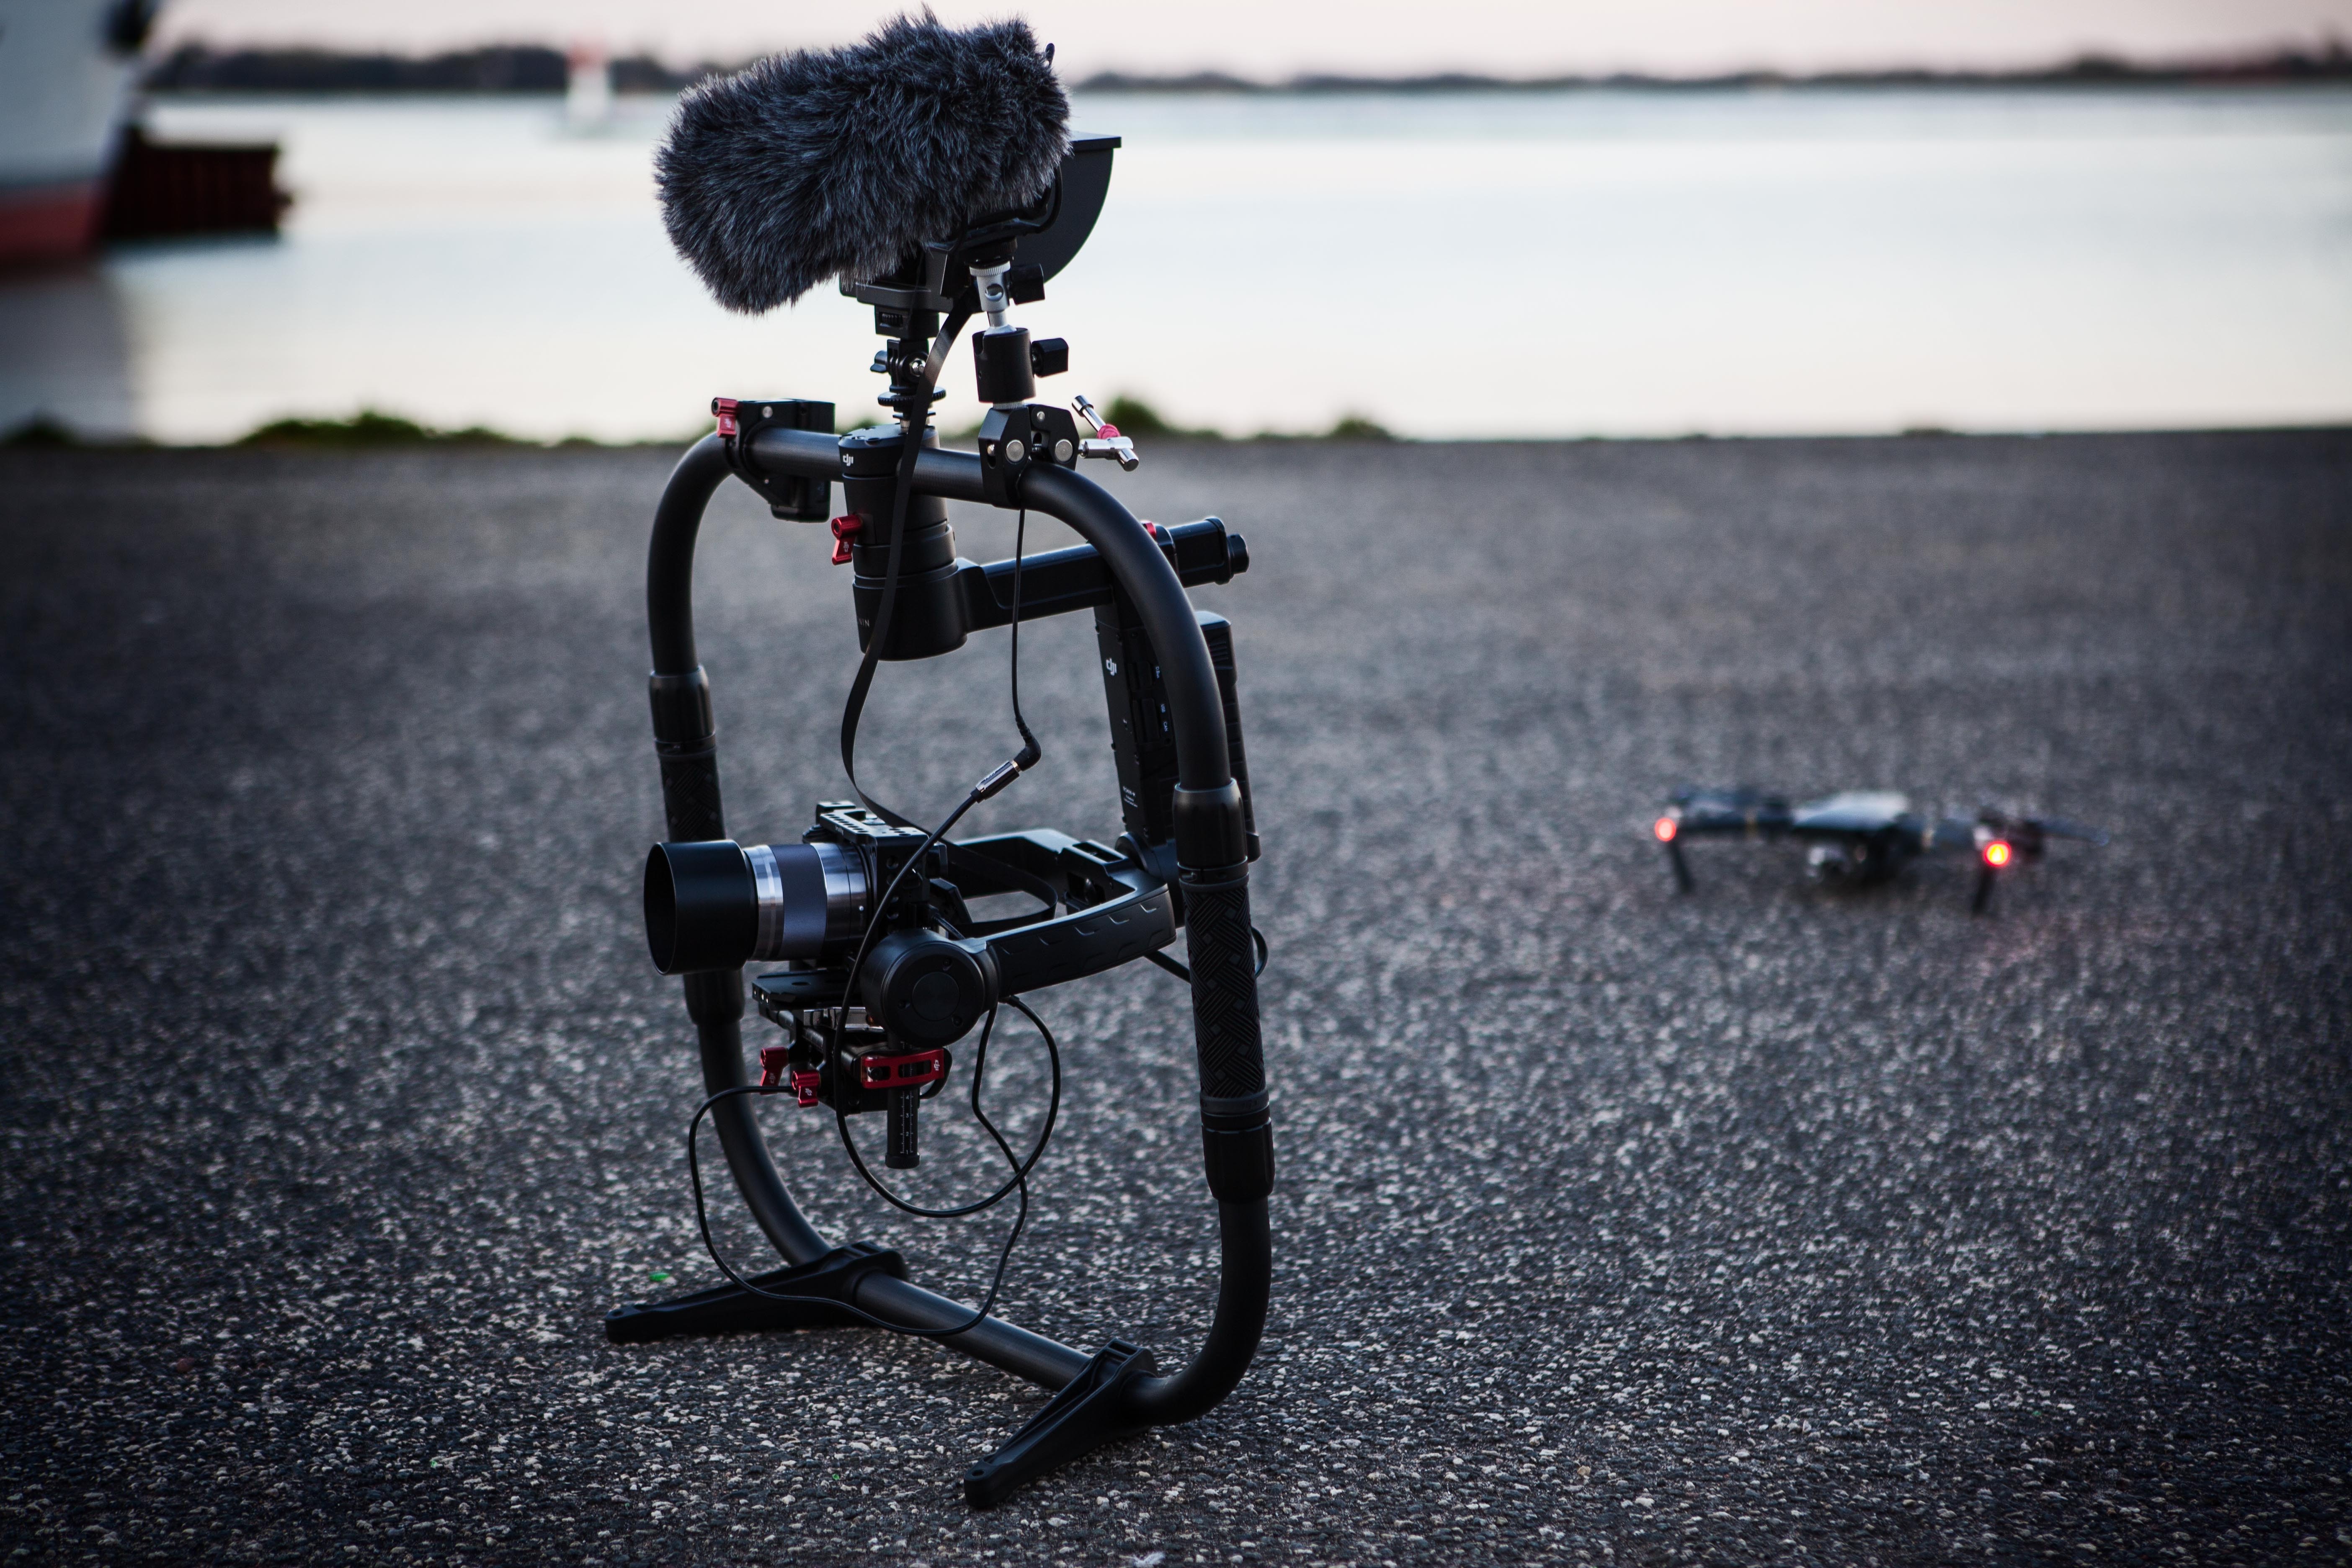 Shallow focus photography of black quadcopter near body of water